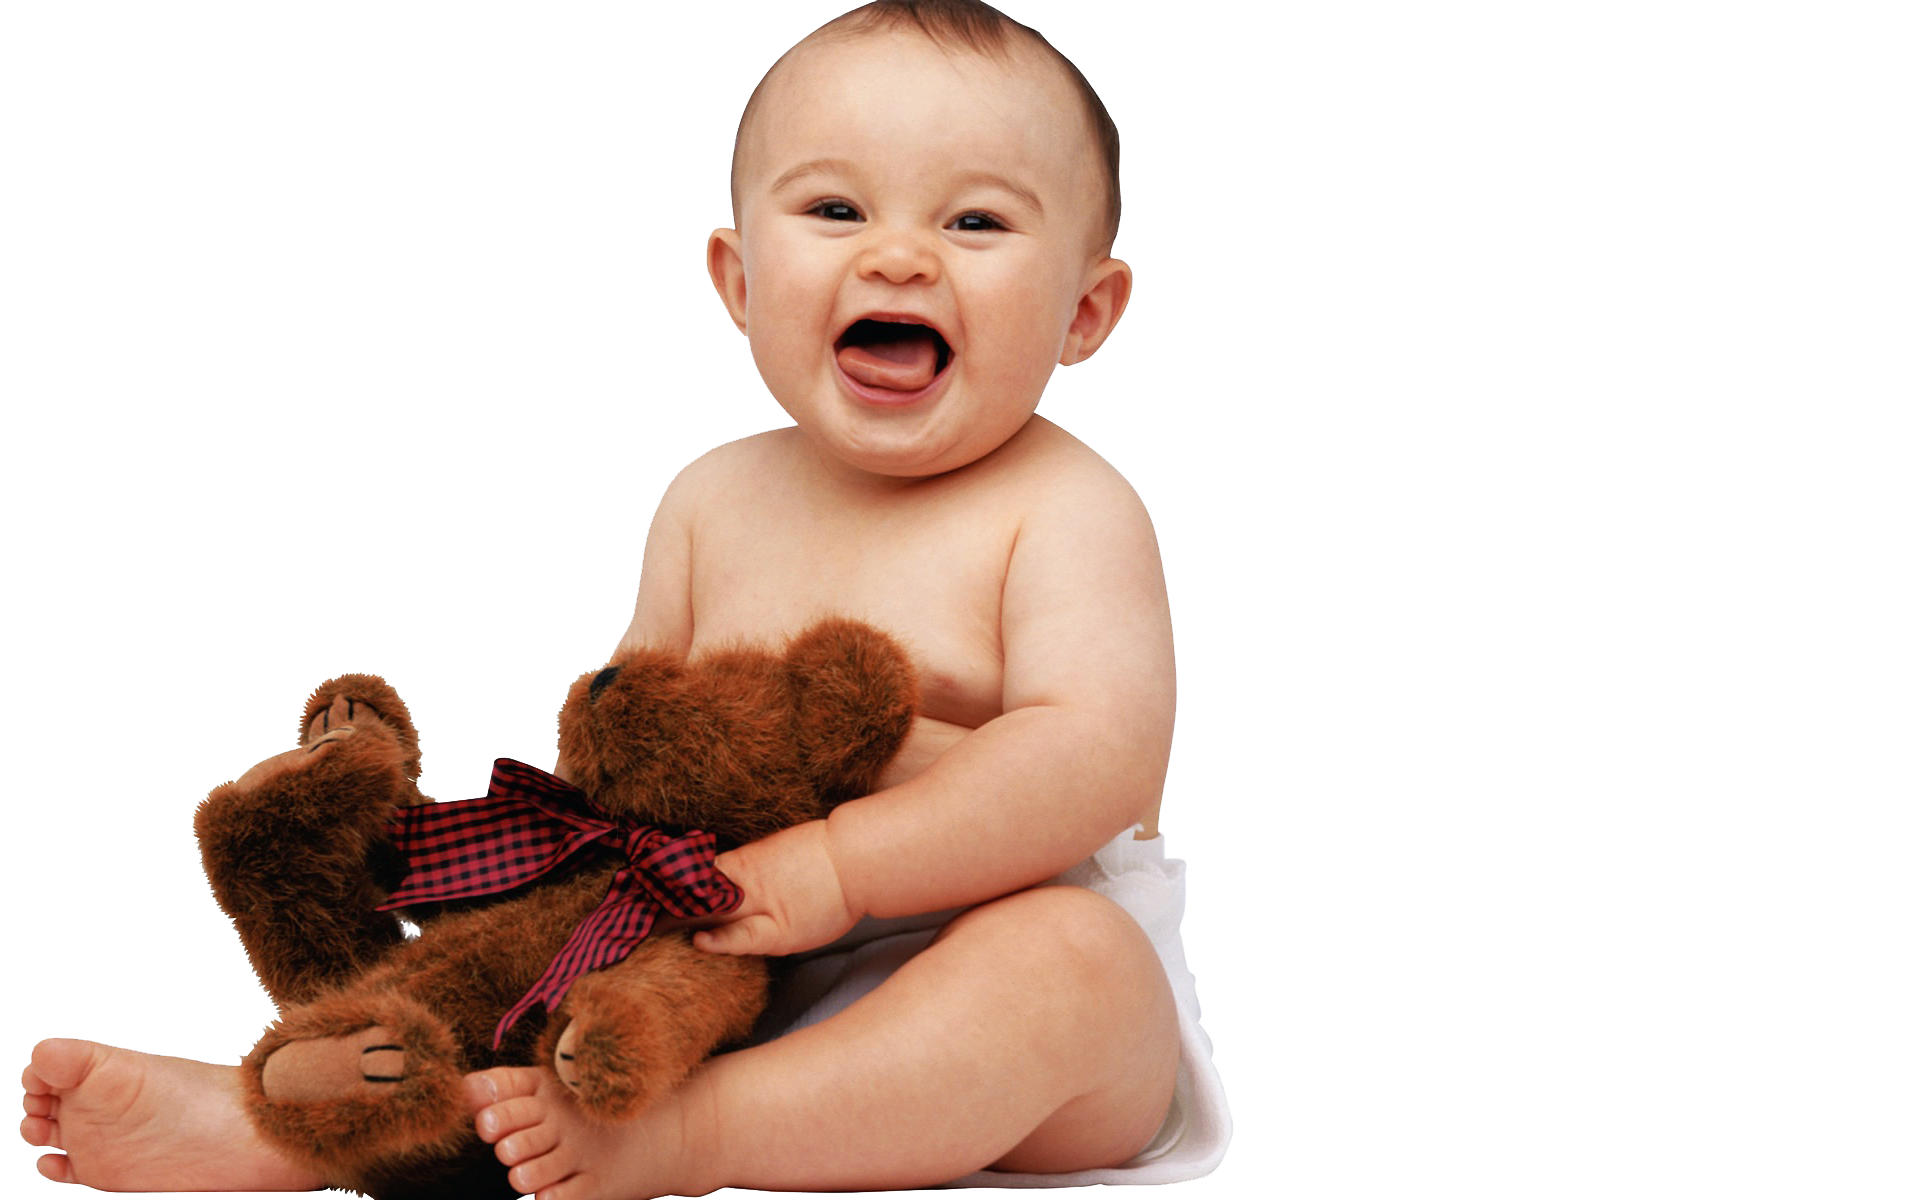 Laughing Png Hd Transparent Laughing Hdpng Images Pluspng